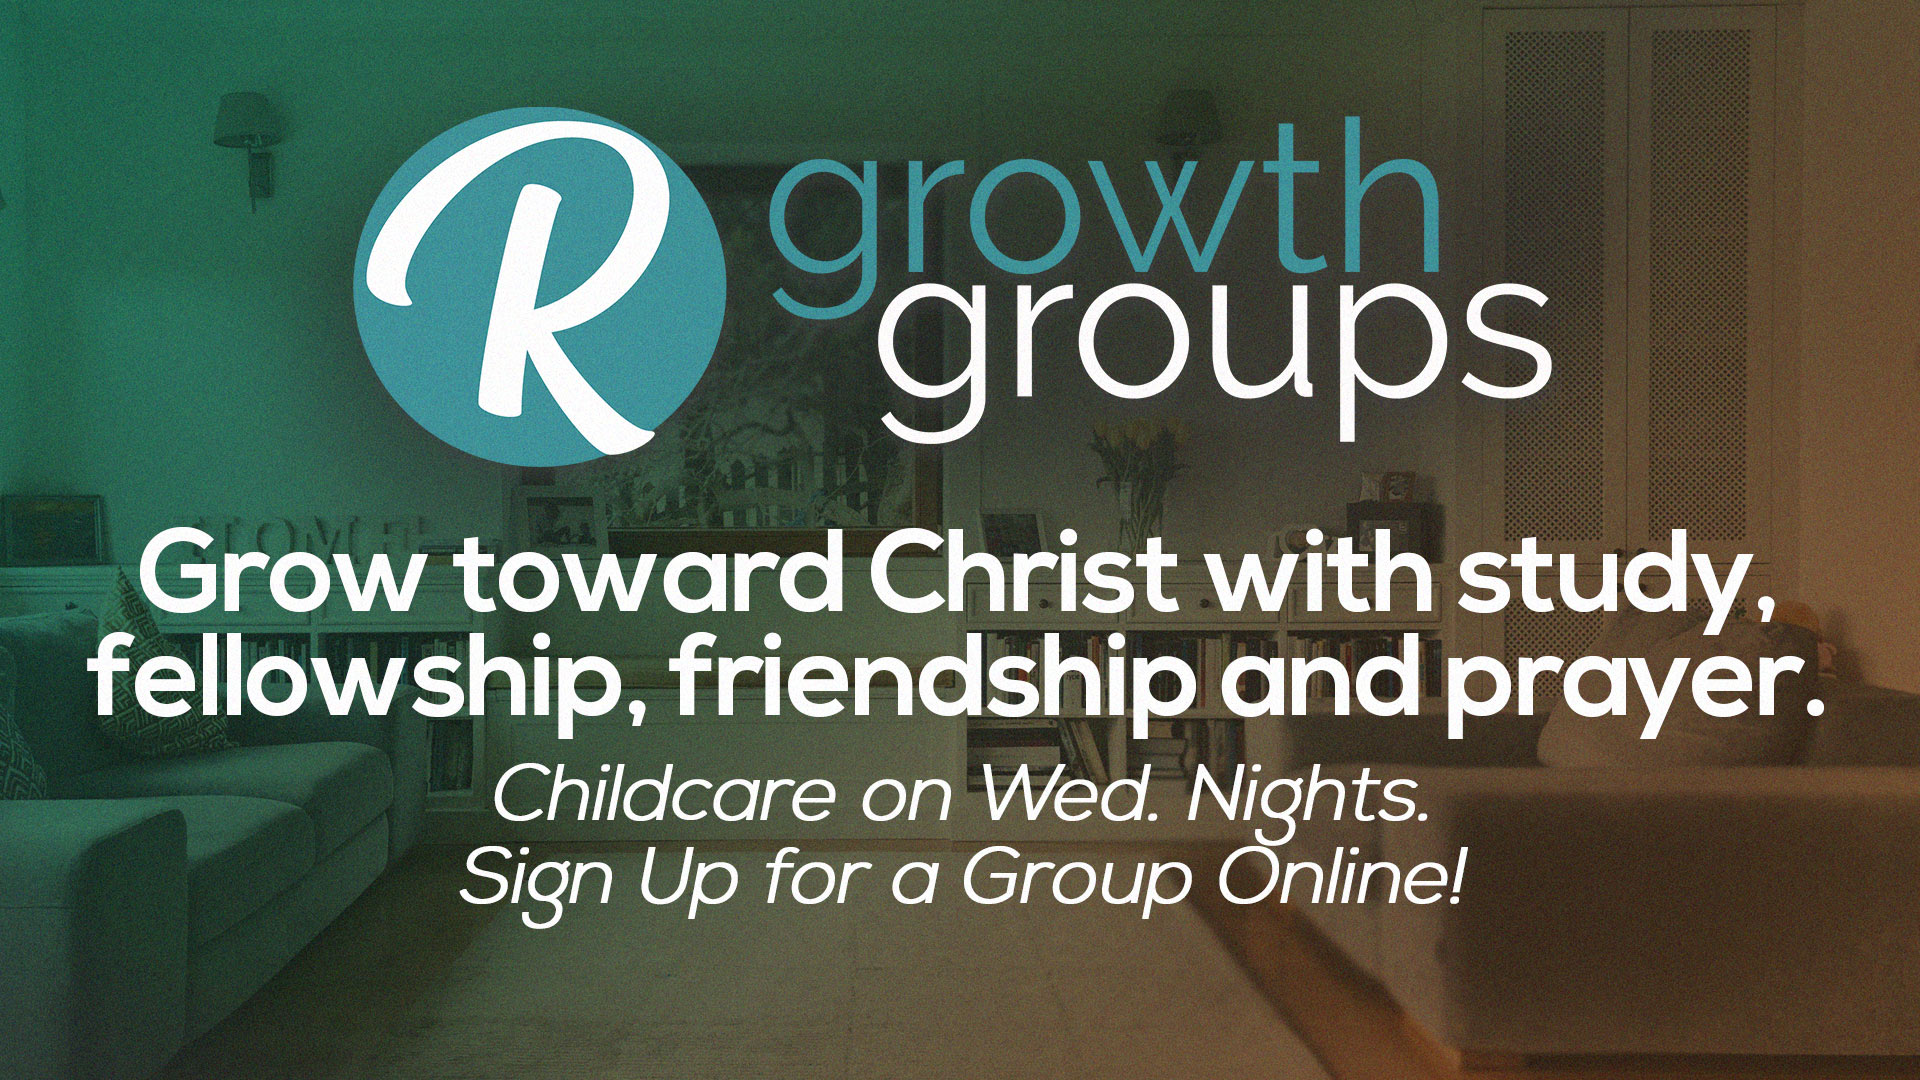 Growth Groups-Small Group Ministry